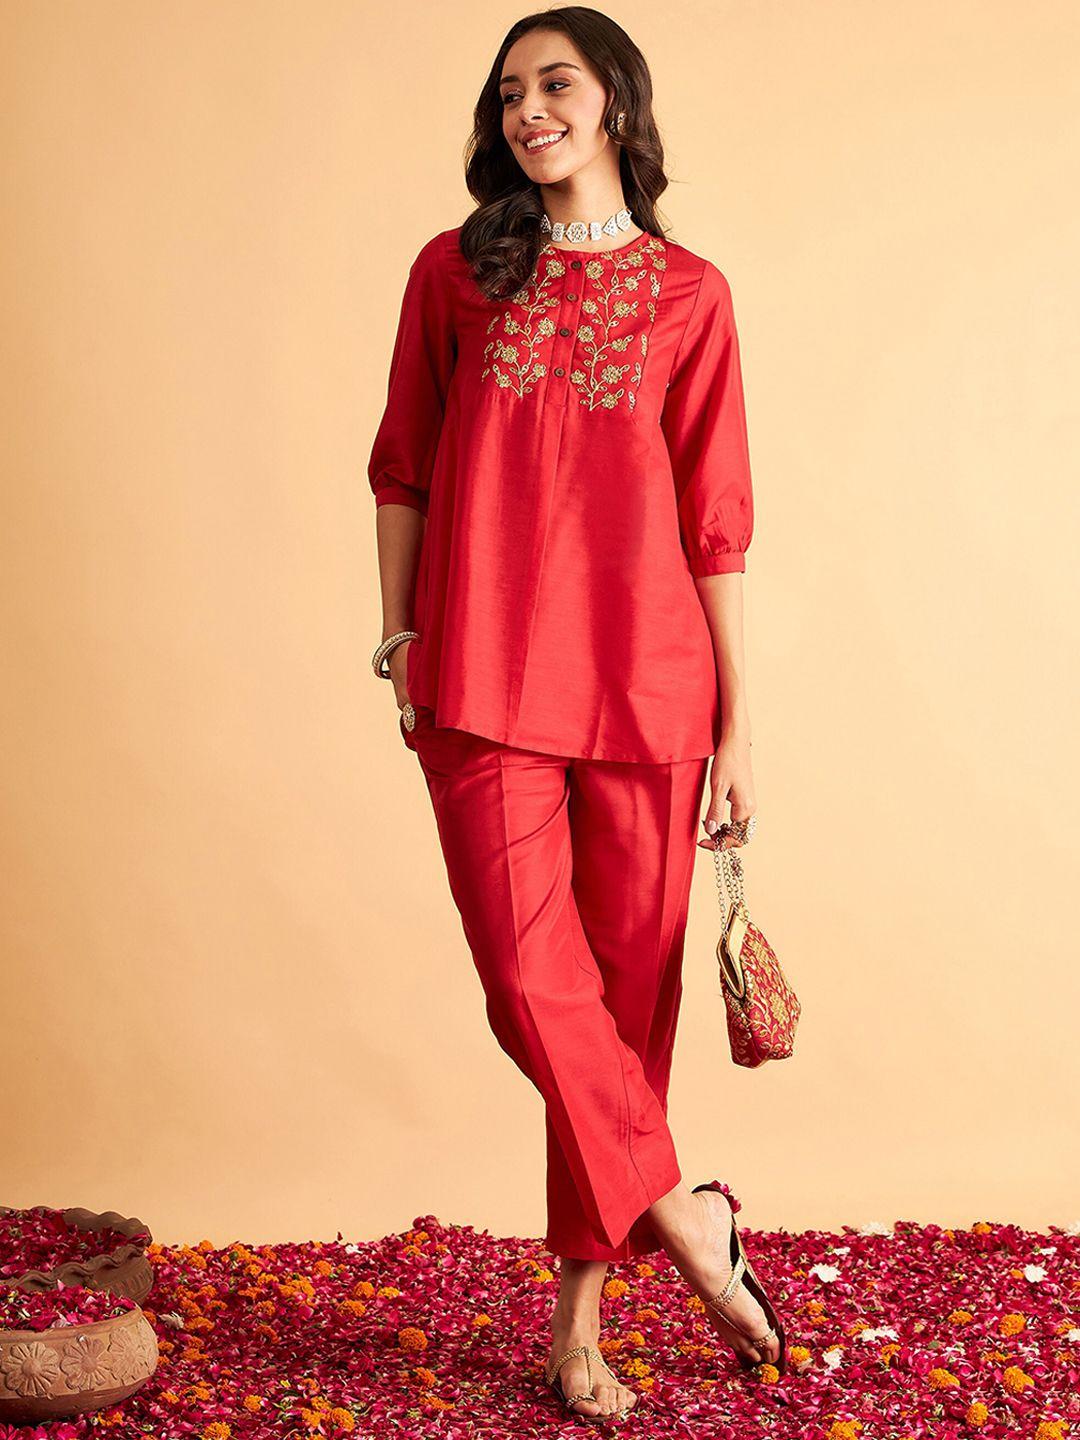 shae by sassafras floral embroidered three-quarter sleeves top & trousers